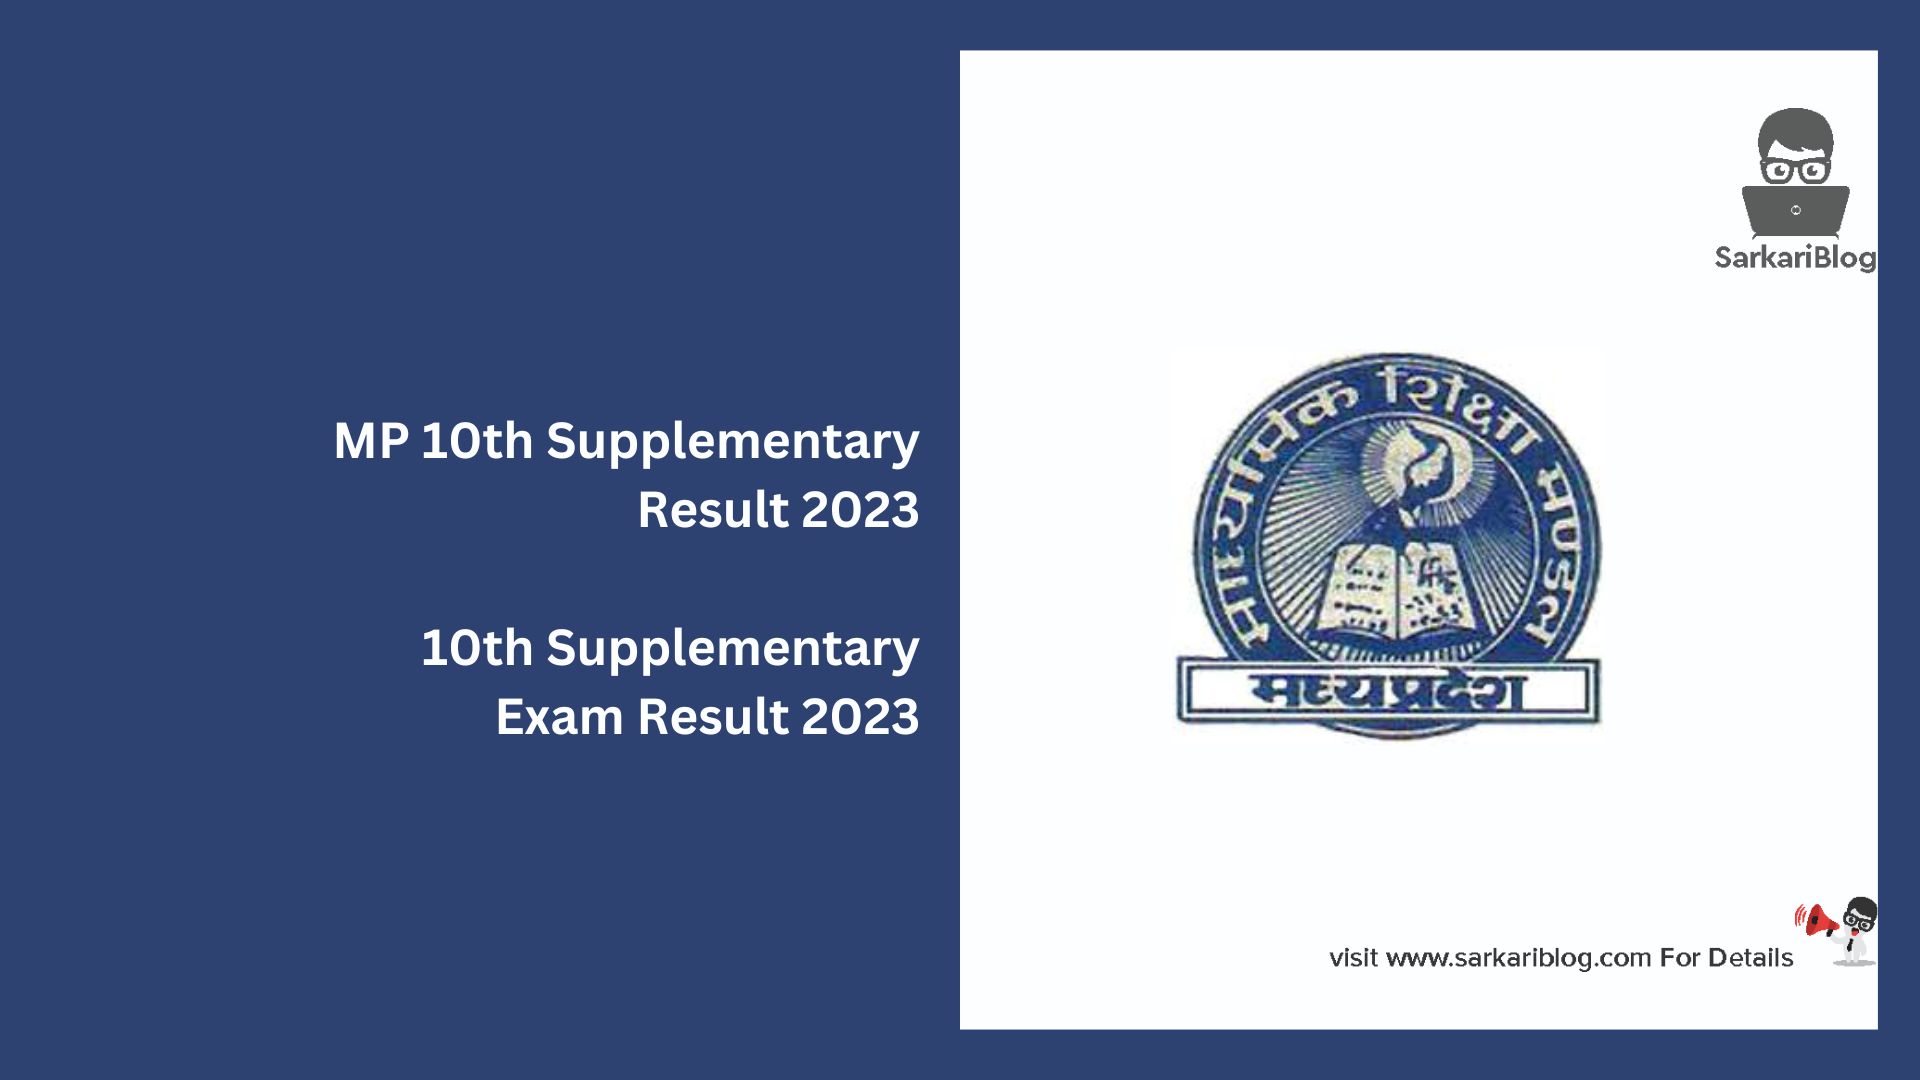 MP 10th Supplementary Result 2023